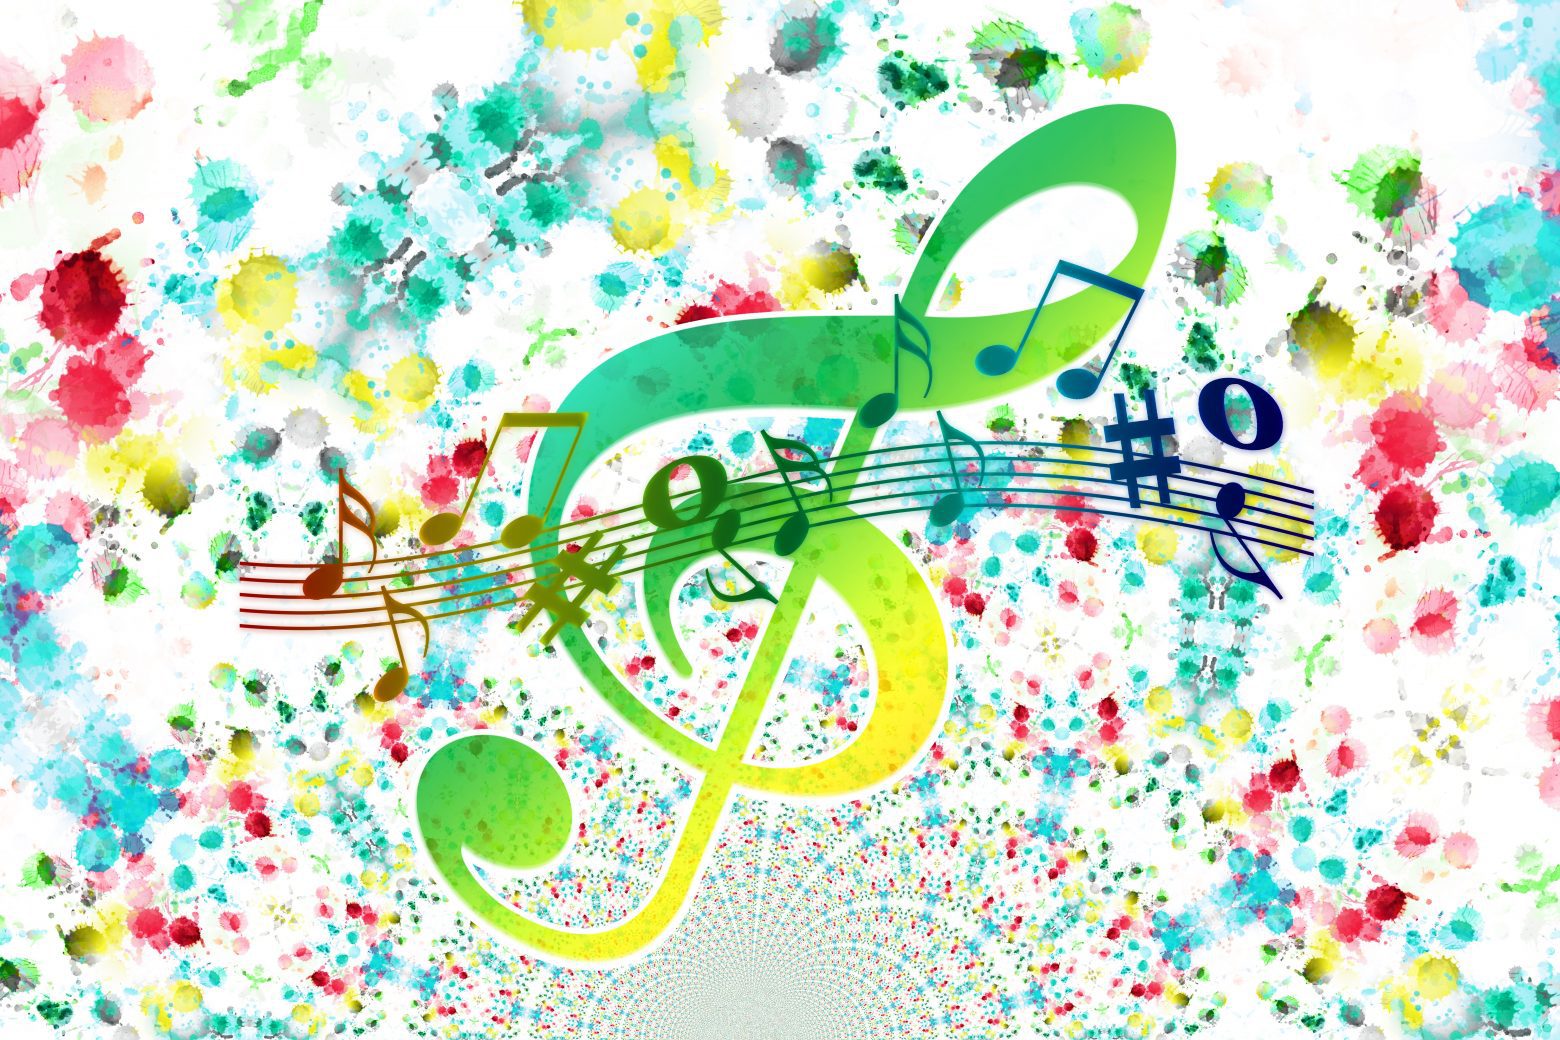 Watercolor music notes